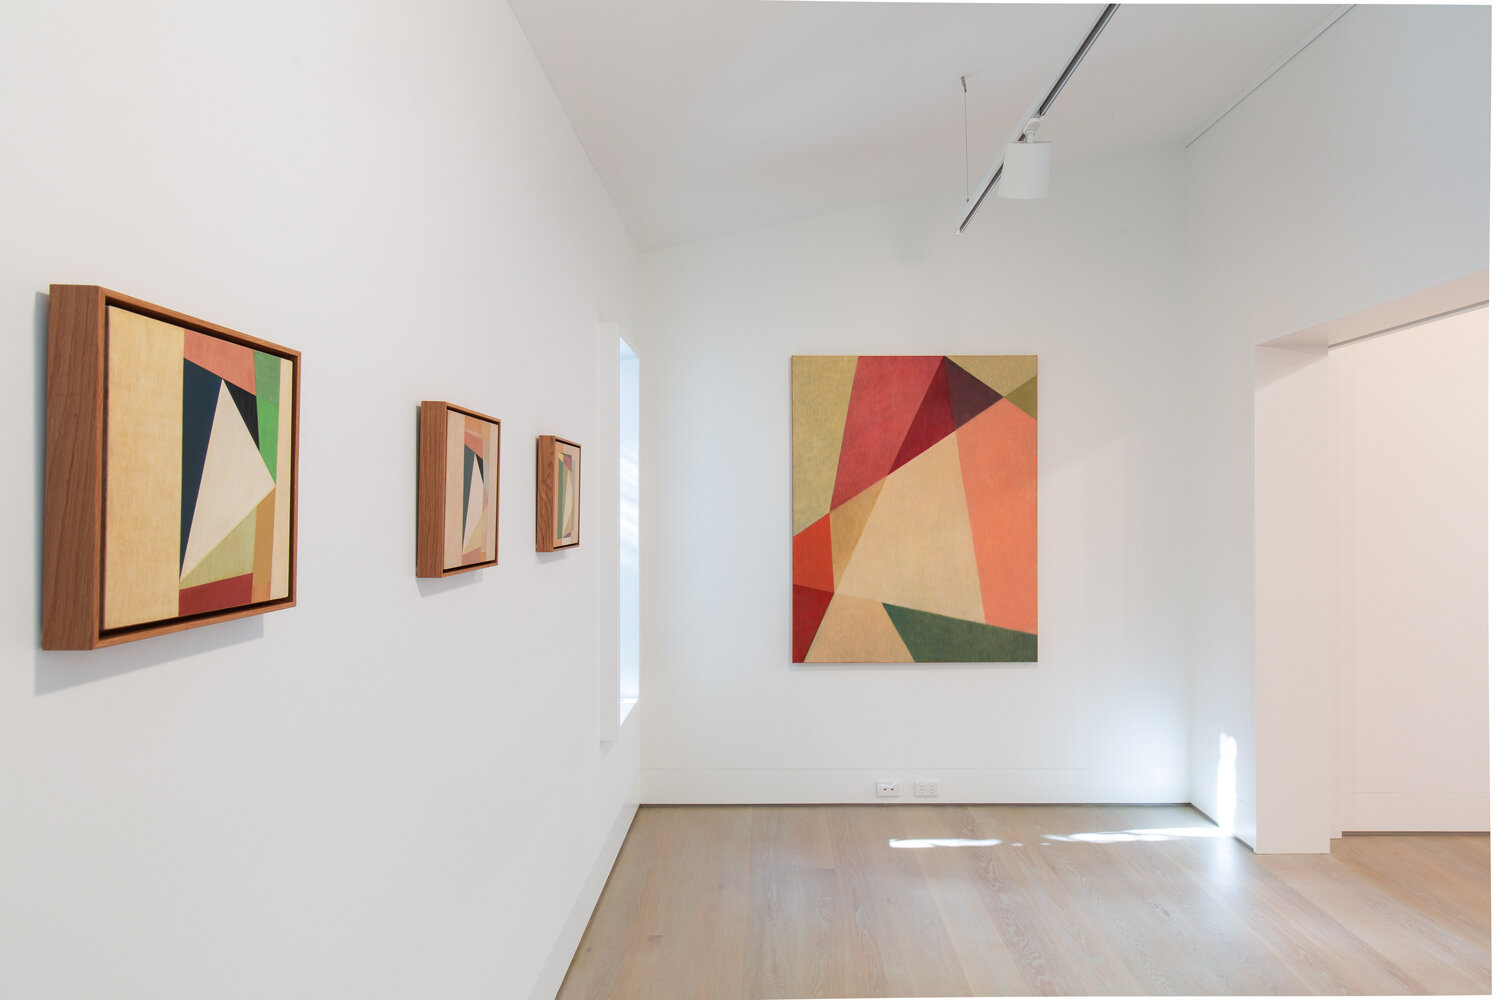  installation view  Changing Places, Jan Murphy Gallery, Brisbane 14 July – 01 August 2020 